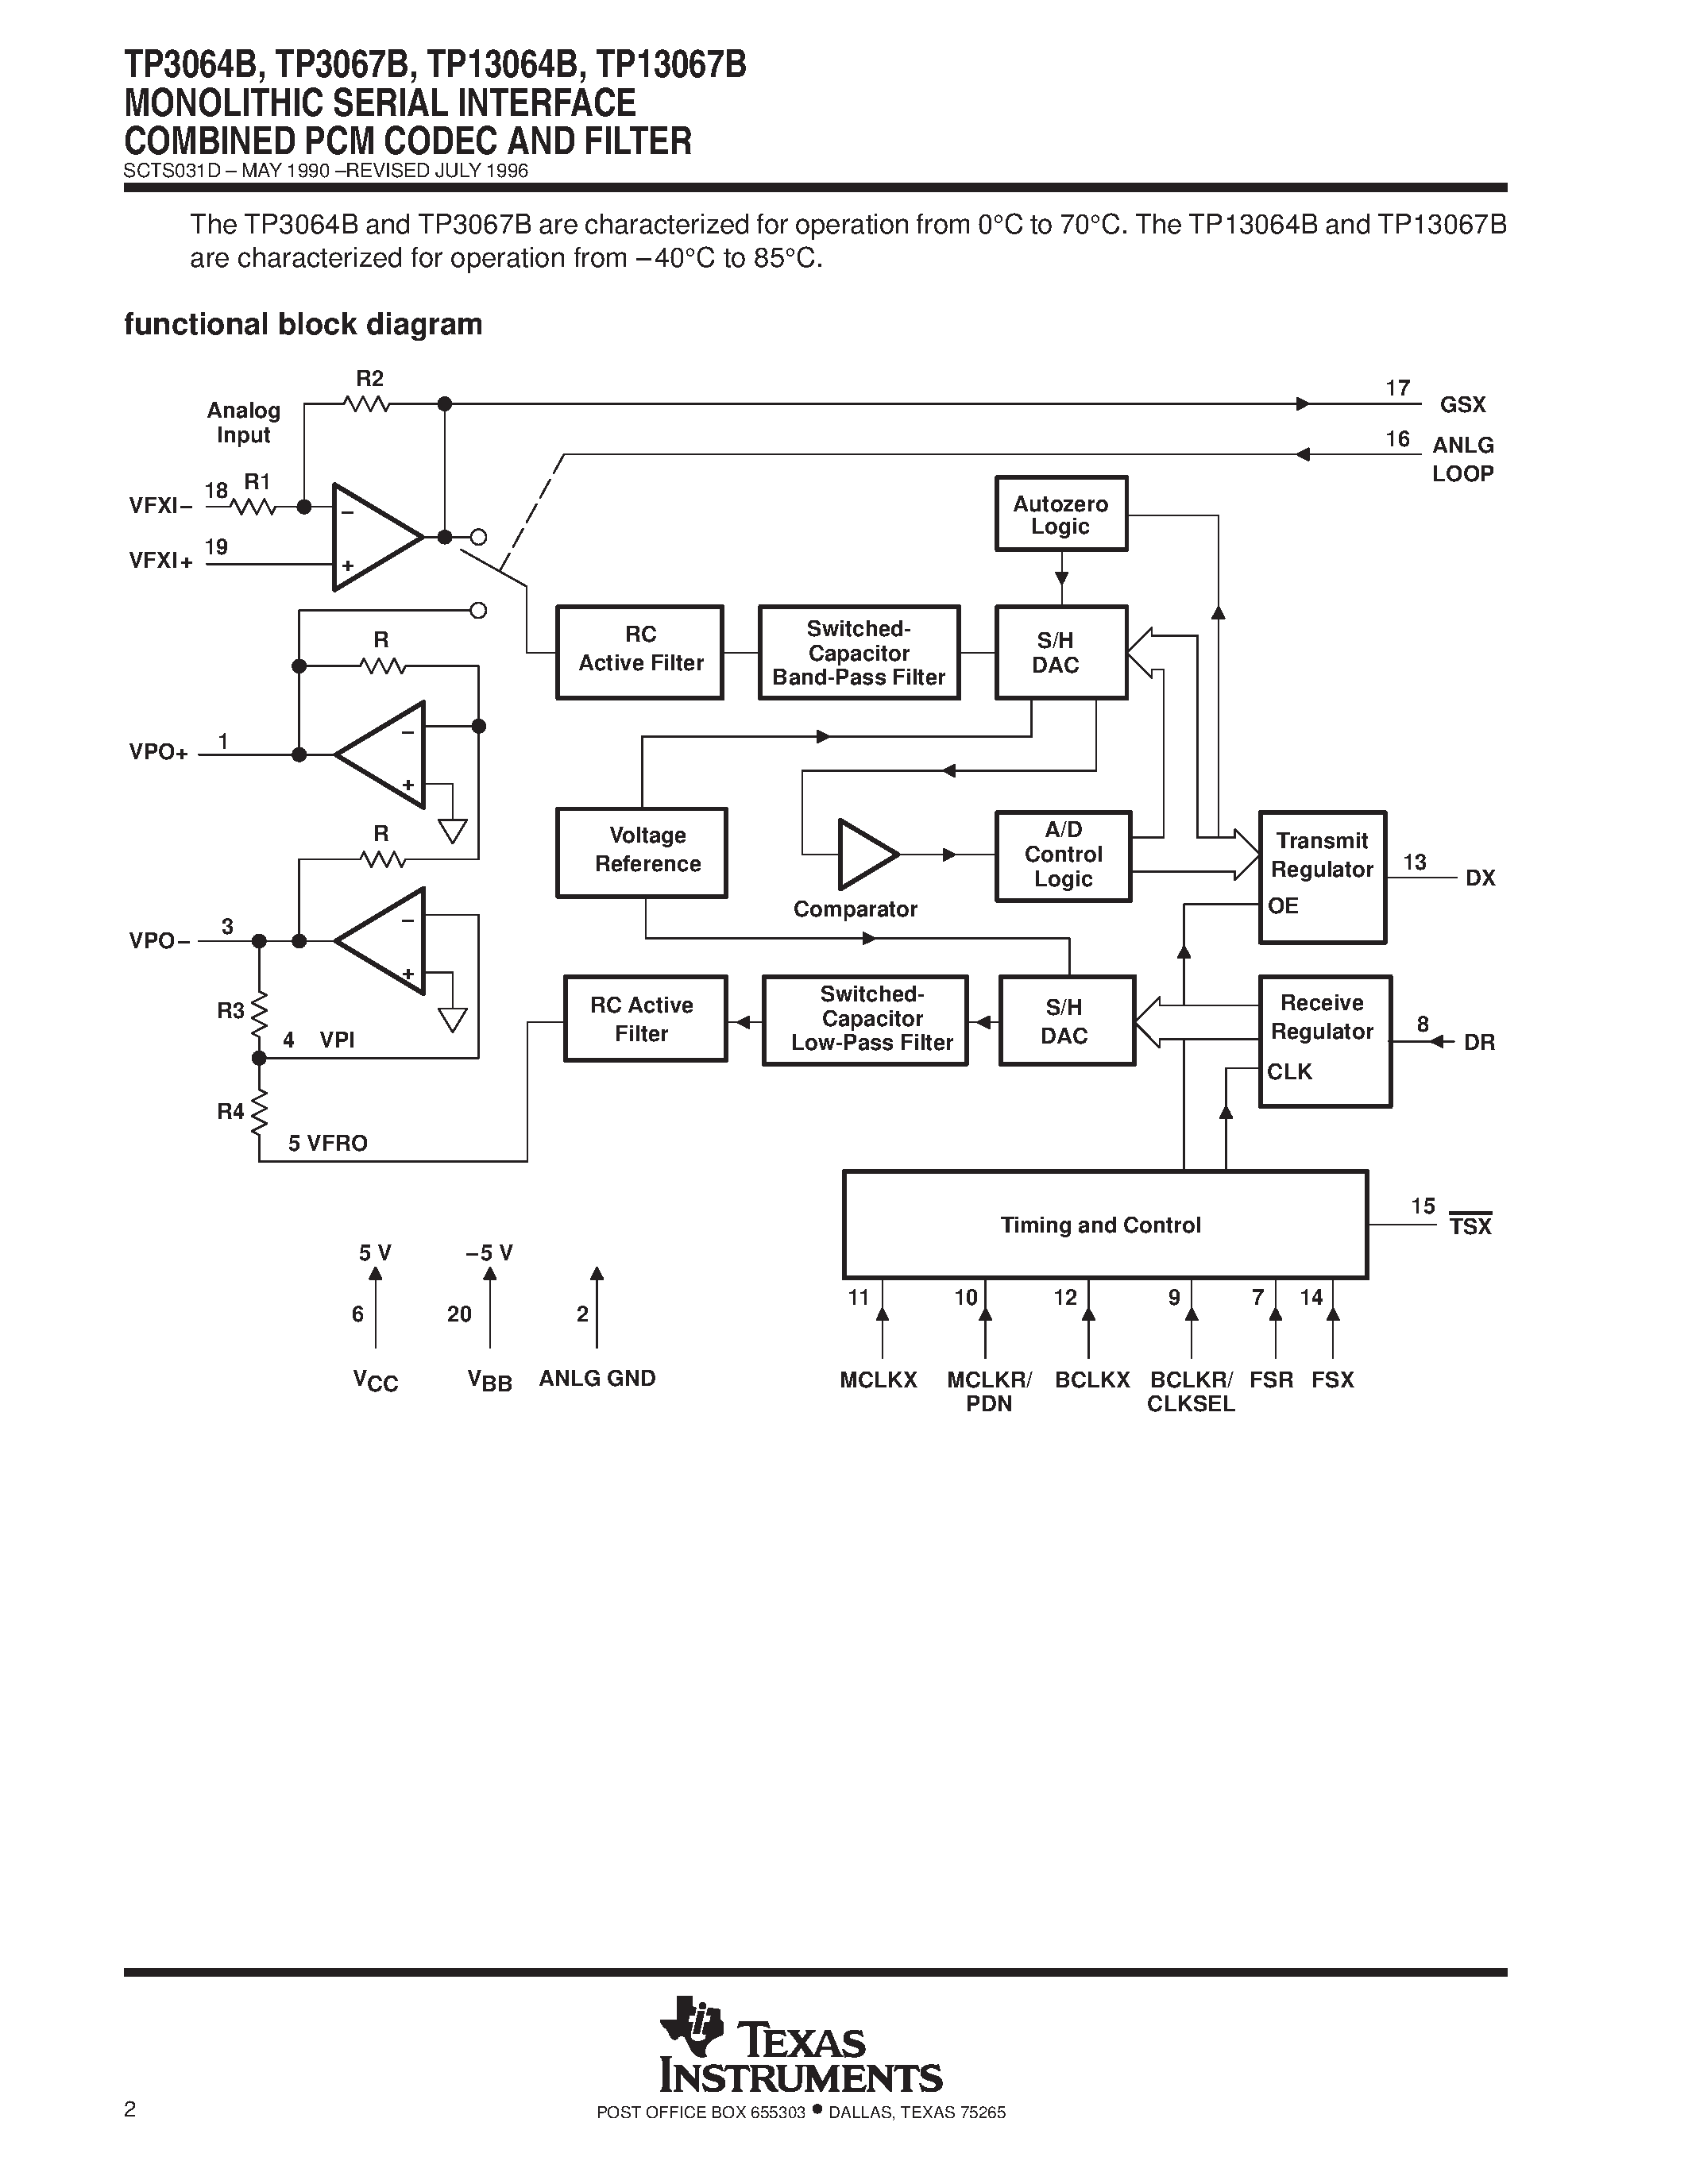 Datasheet TP13064BDW - MONOLITHIC SERIAL INTERFACE COMBINED PCM CODEC AND FILTER page 2